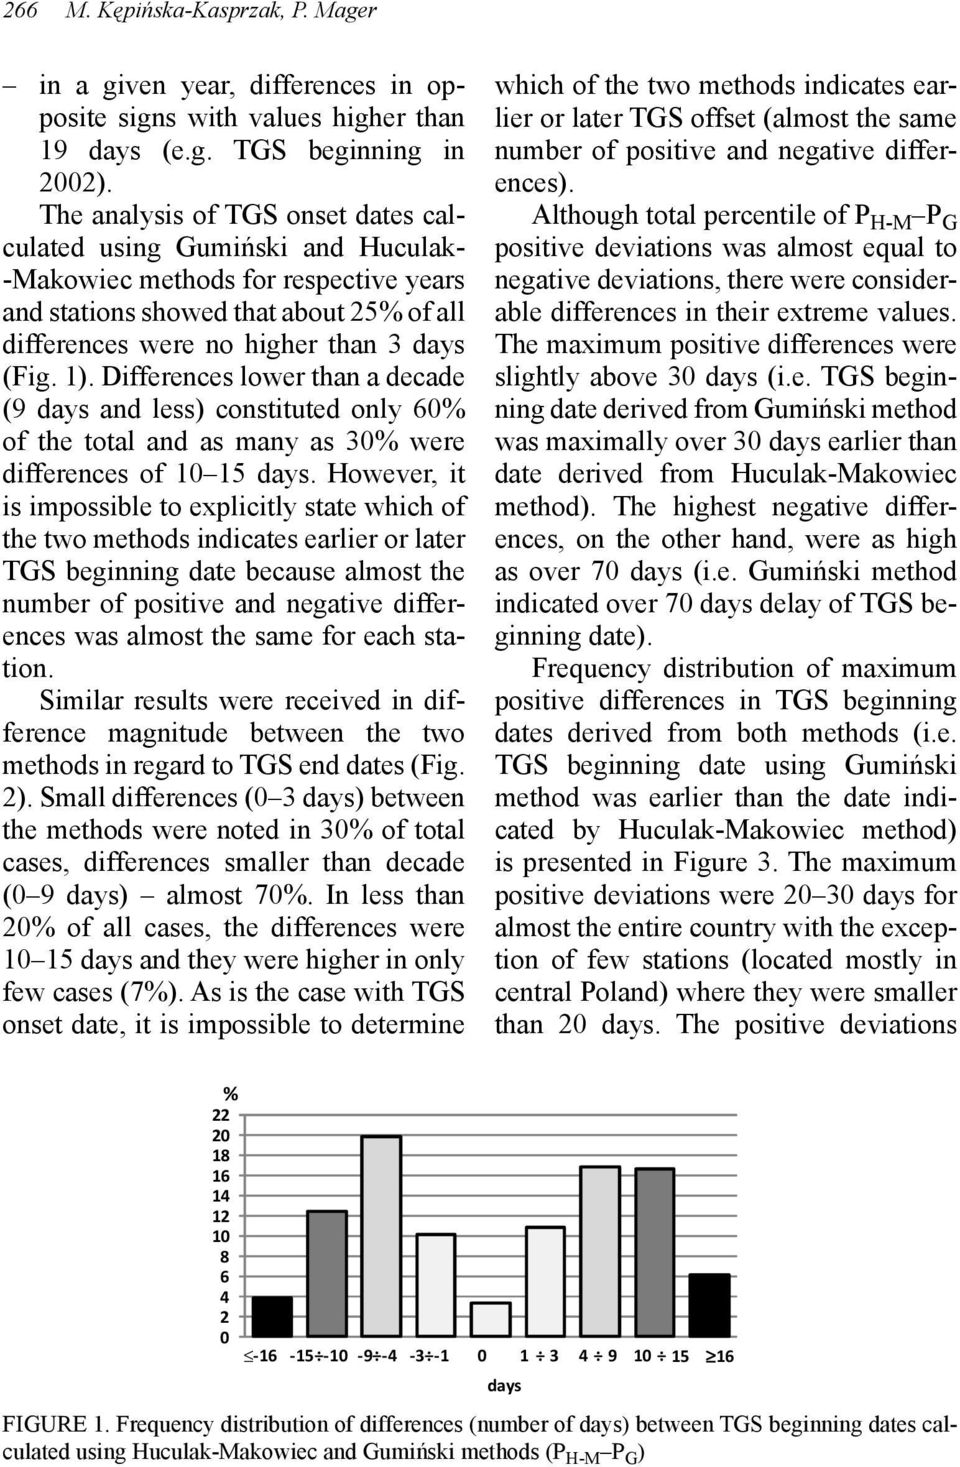 The analysis of TGS onset dates calculated using Gumiński and Huculak- -Makowiec methods for respective years and stations showed that about 25% of all differences were no higher than 3 days (Fig. 1).